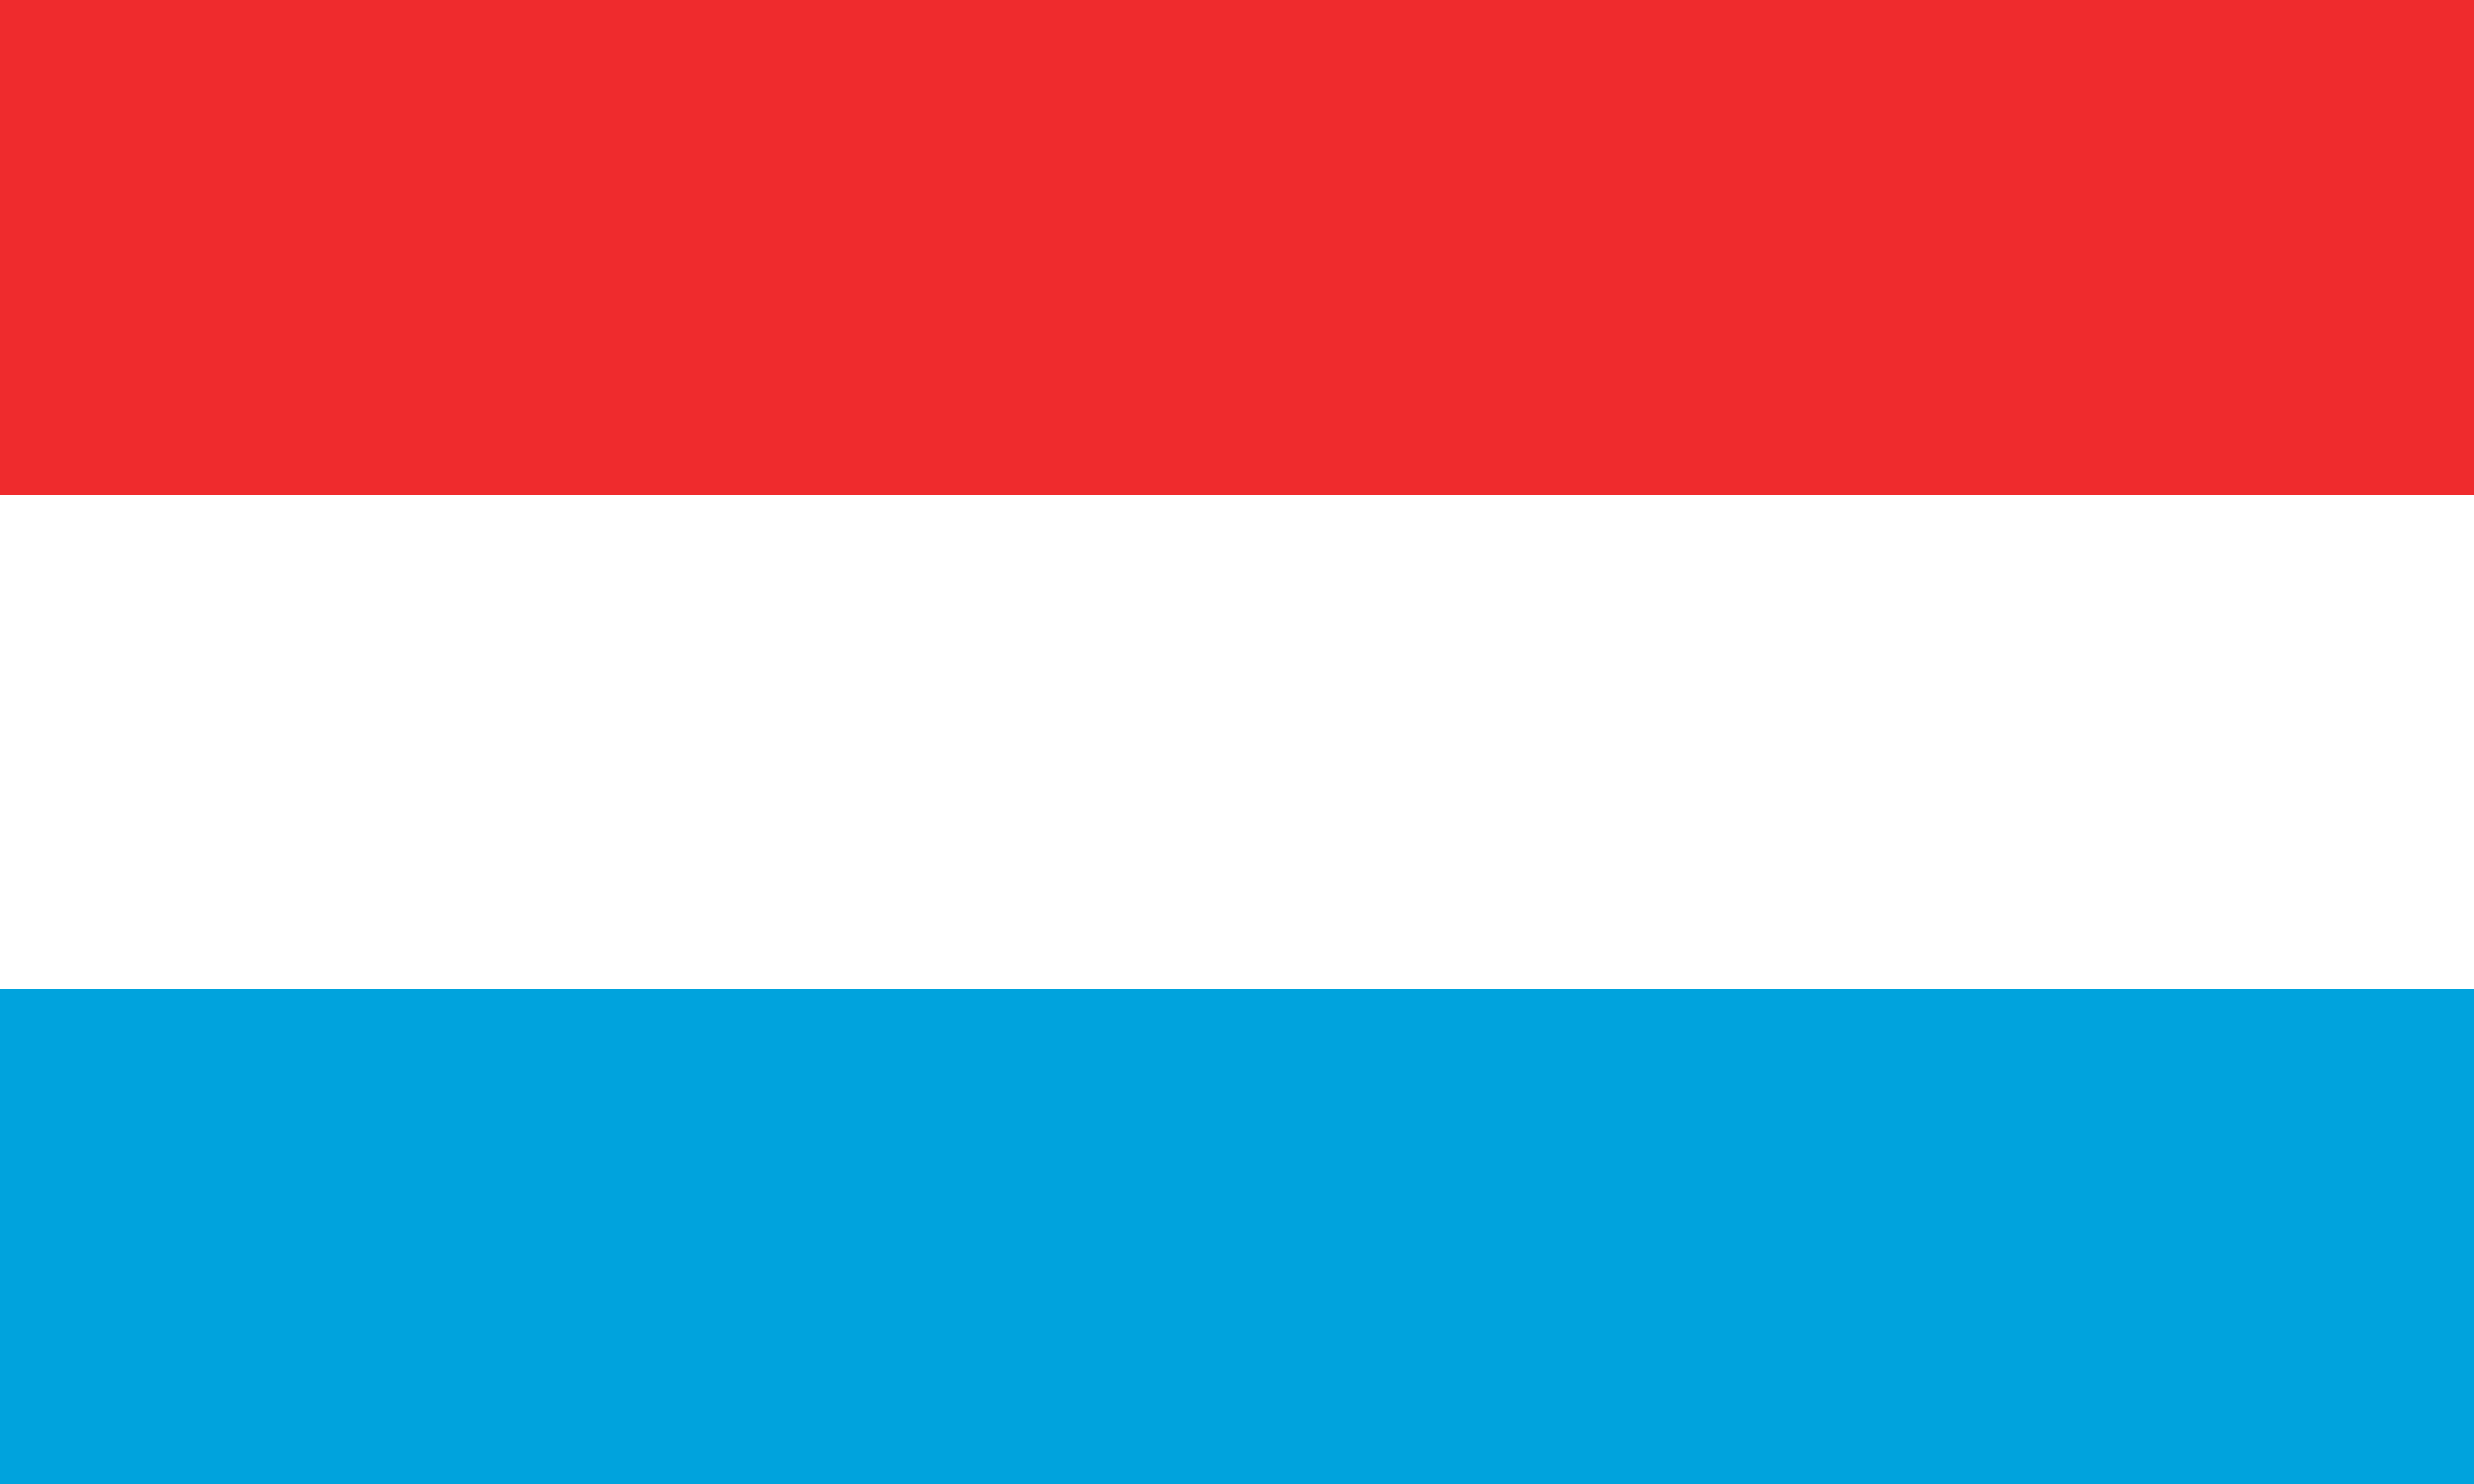 Luxembourg legalises gay marriage